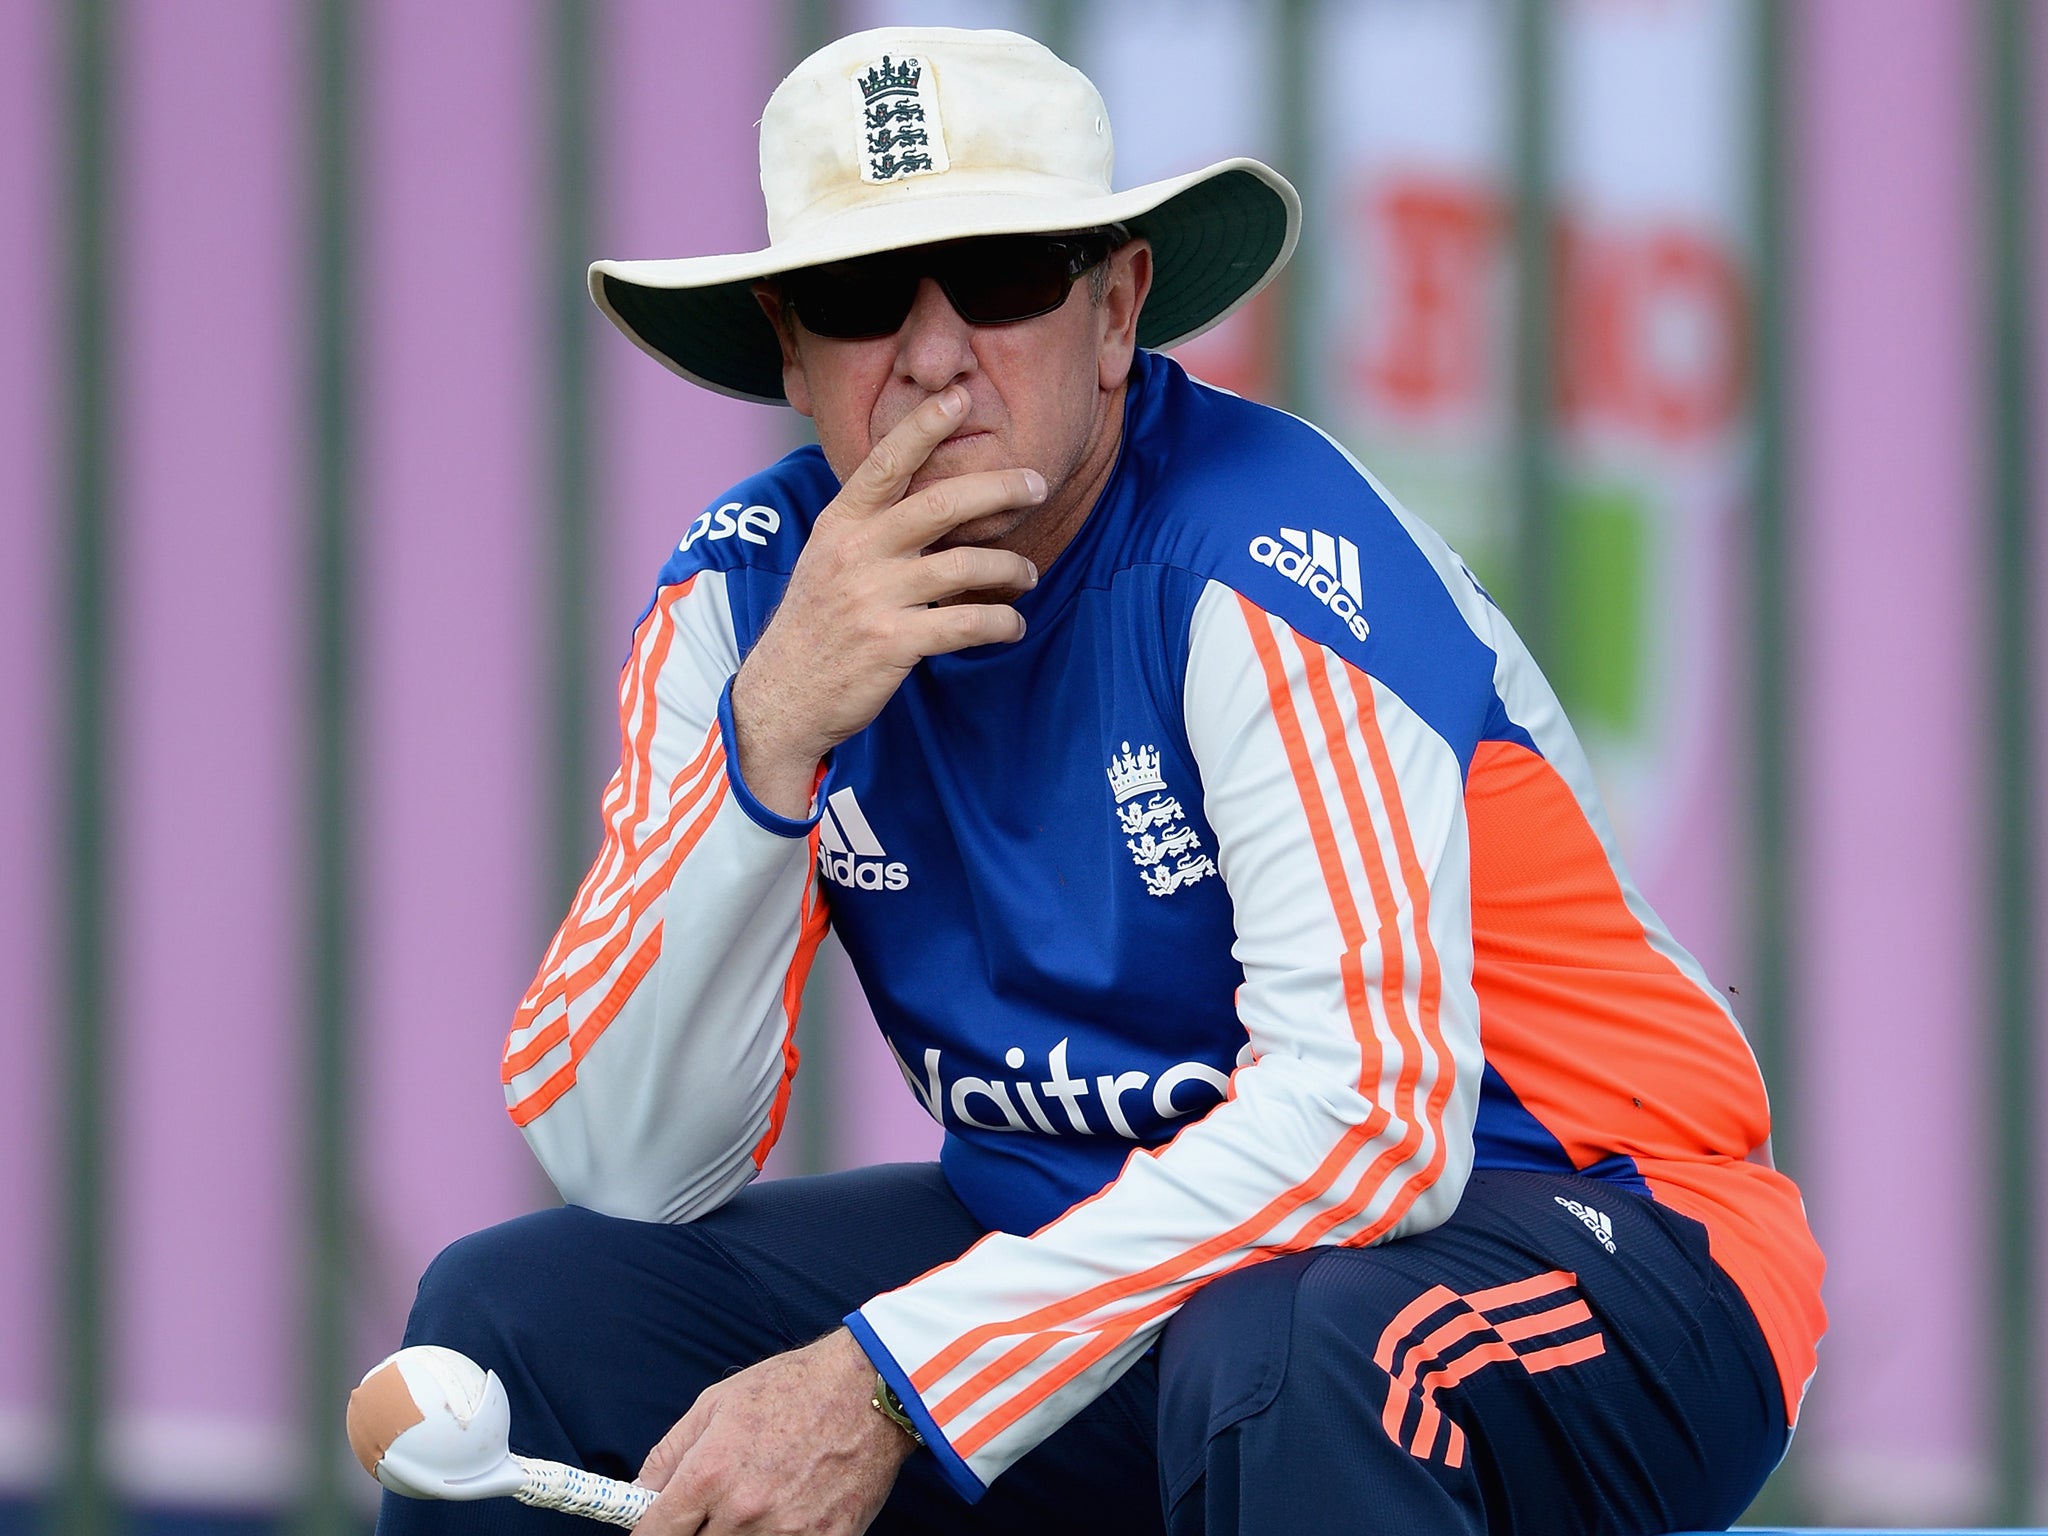 Trevor Bayliss has called on his players to continue being bold